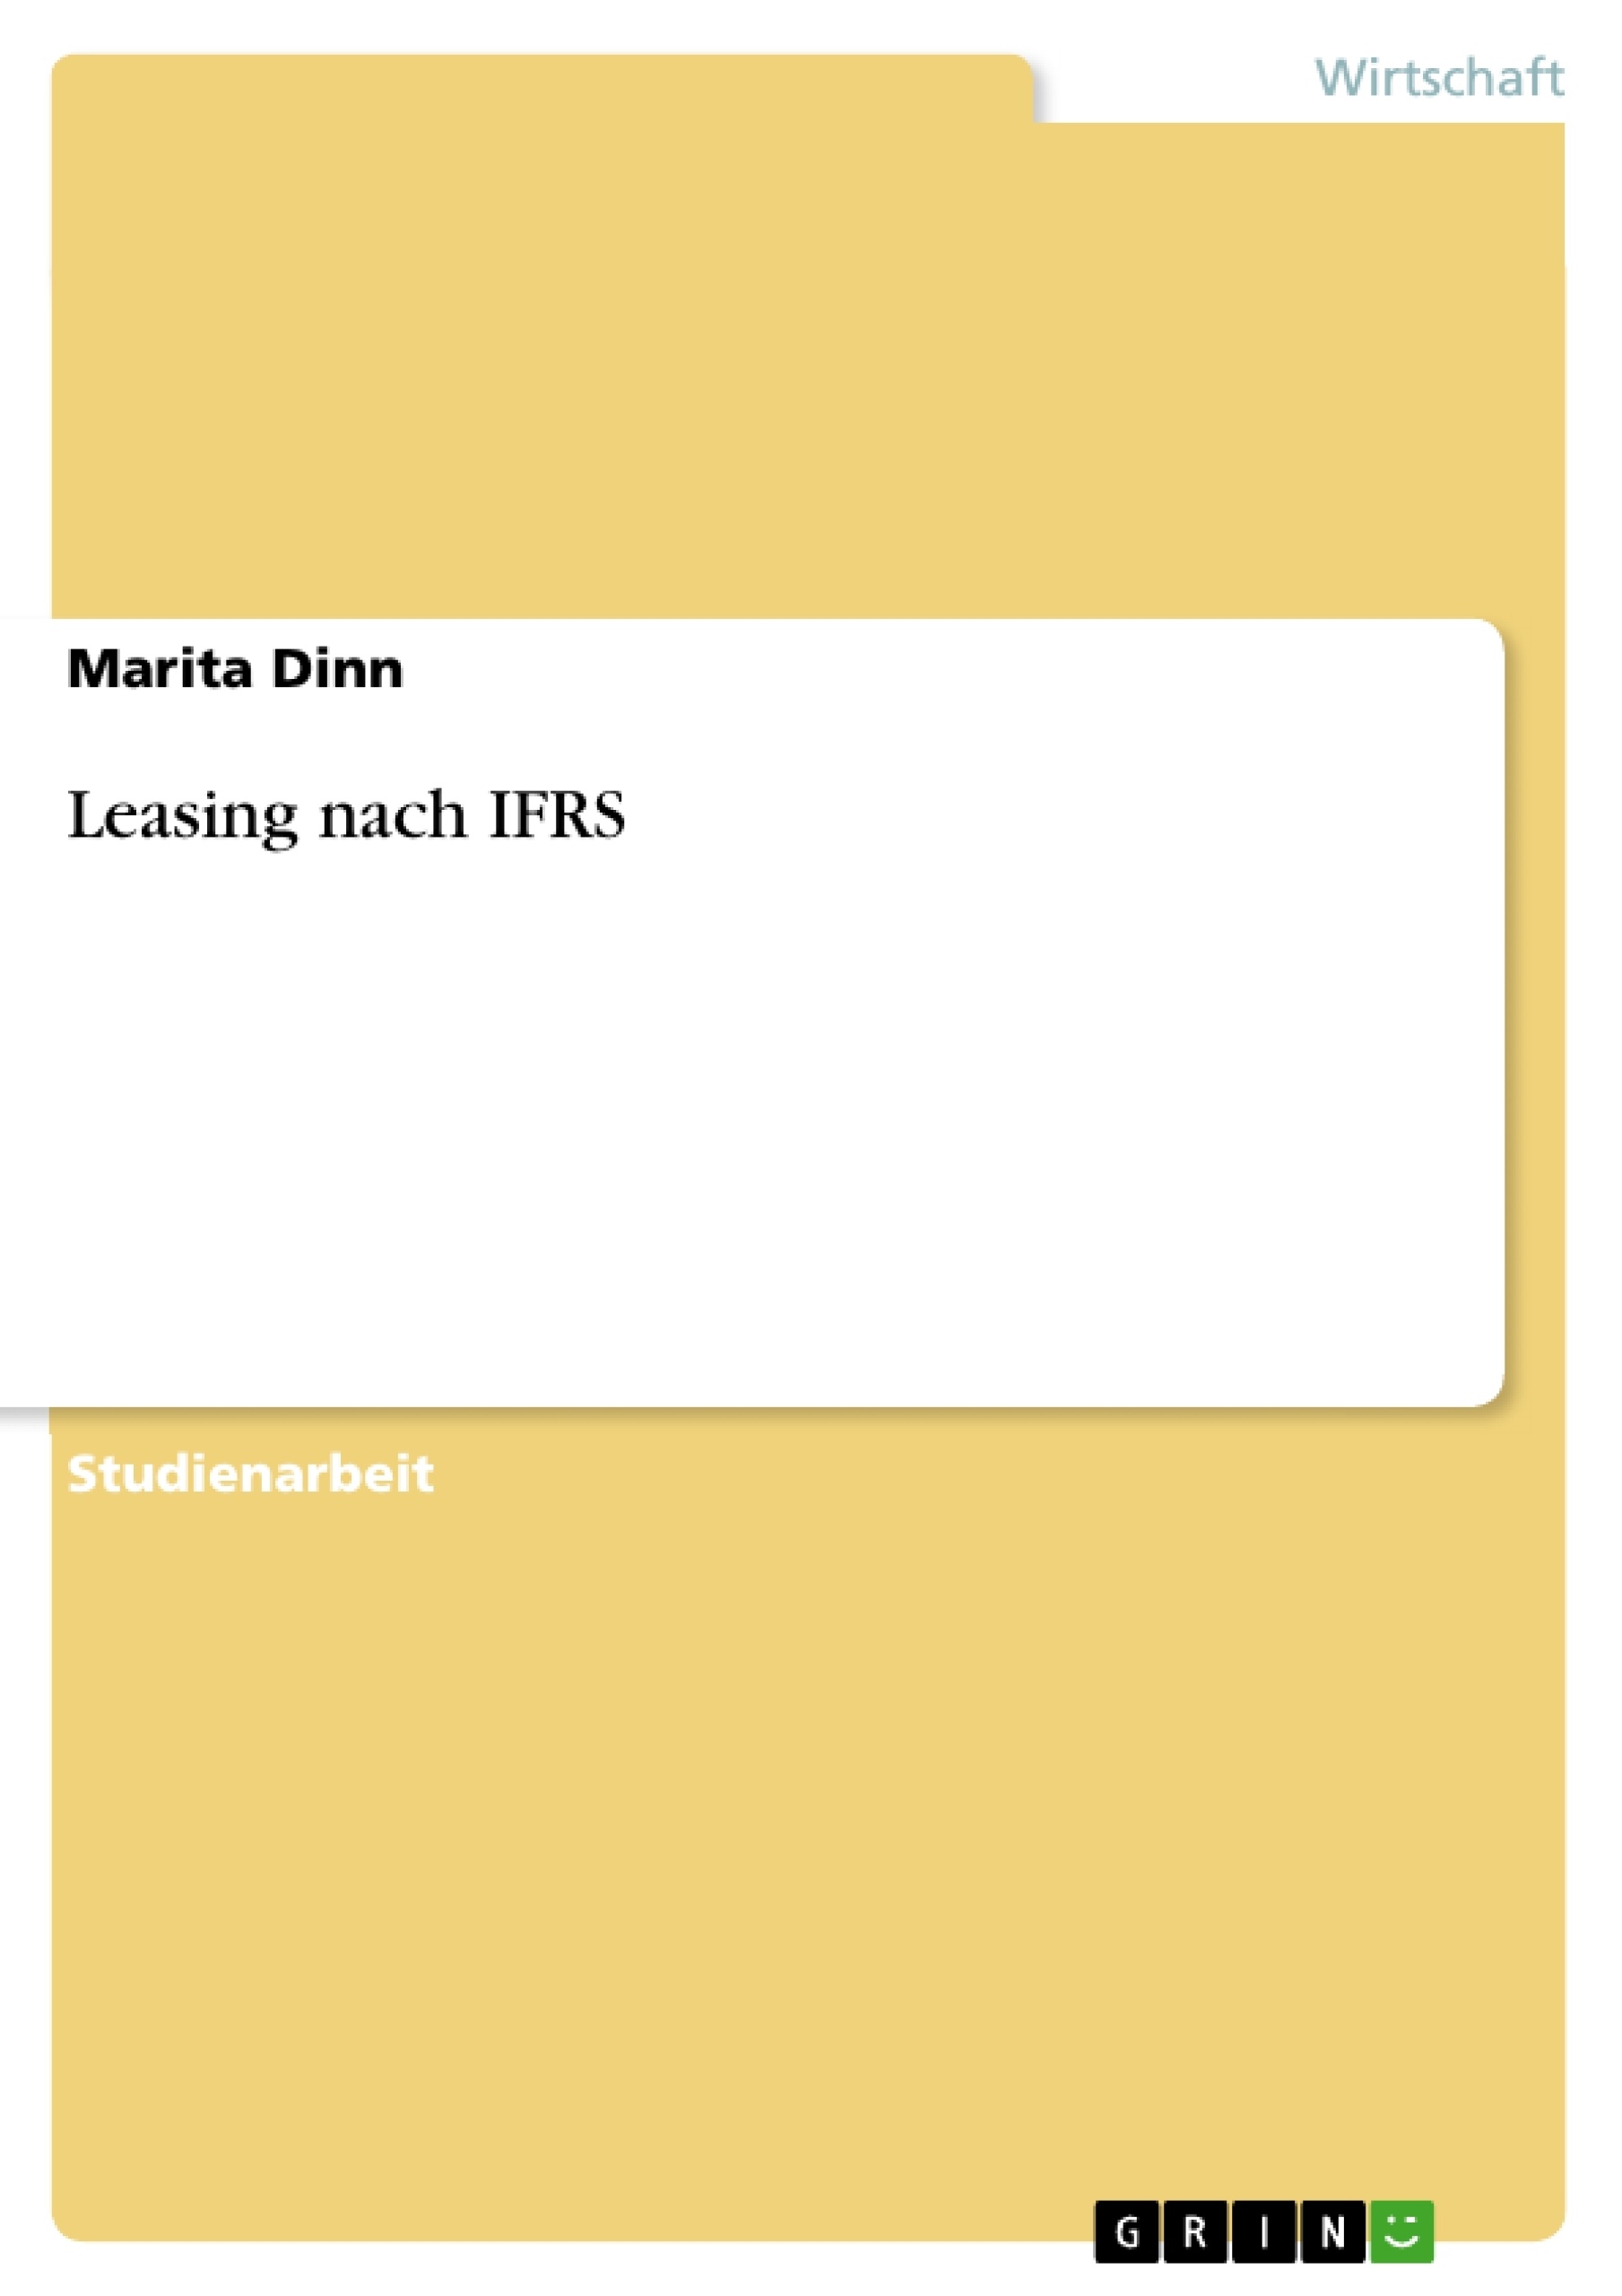 Titre: Leasing nach IFRS